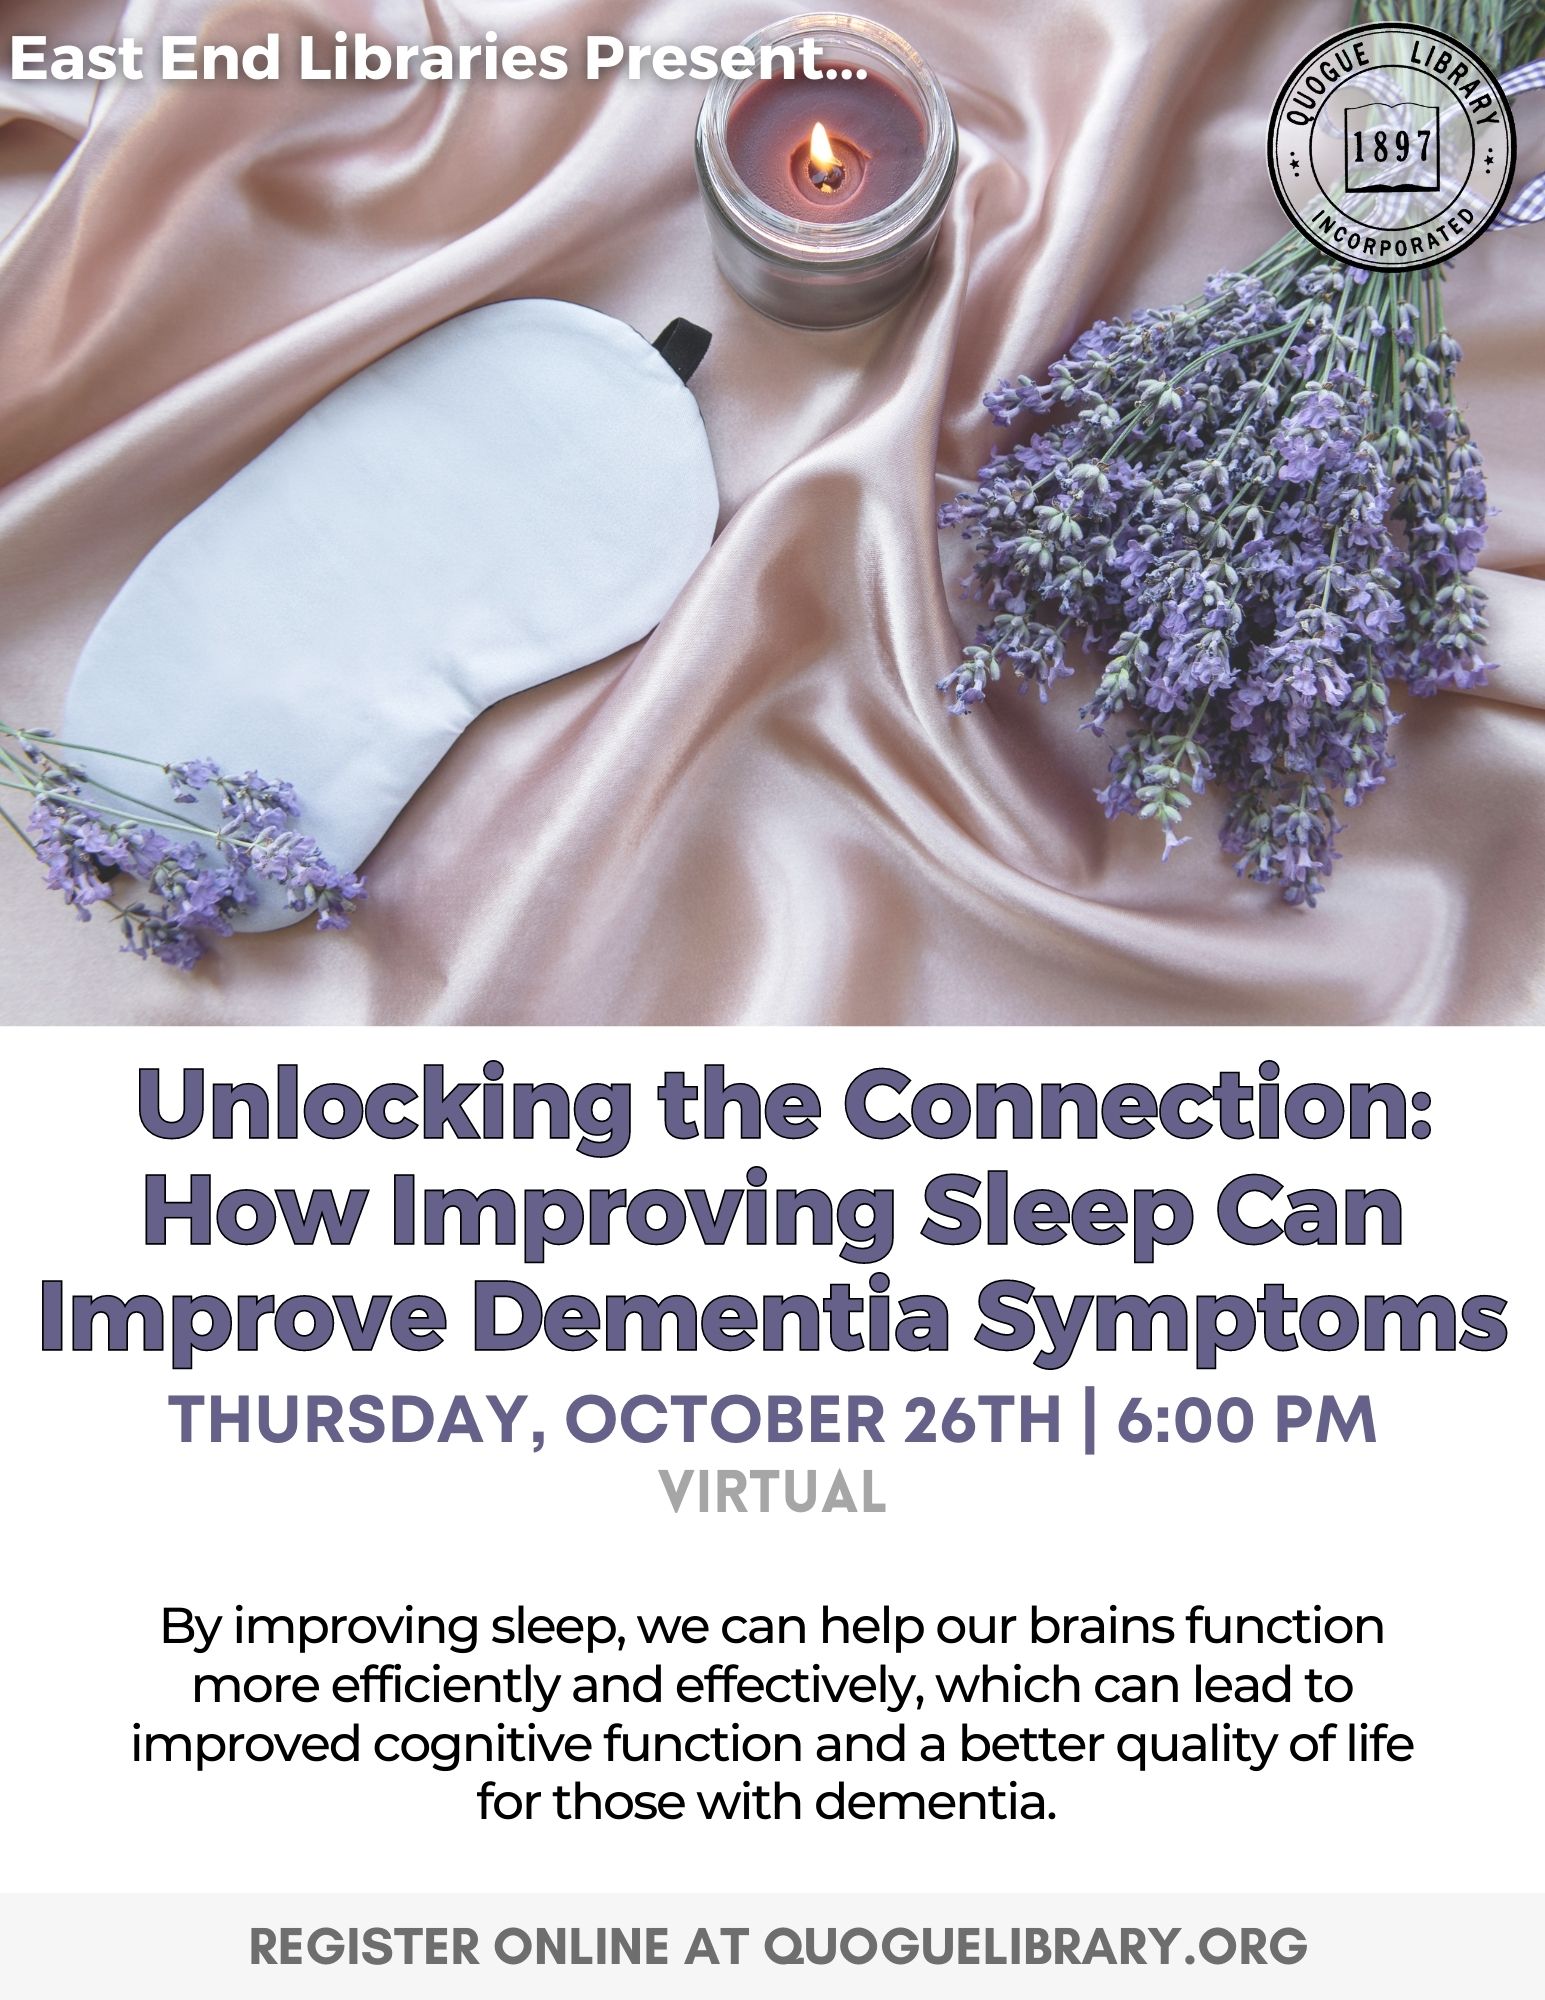  Unlocking the Connection: How Improving Sleep Can Improve Dementia Symptoms